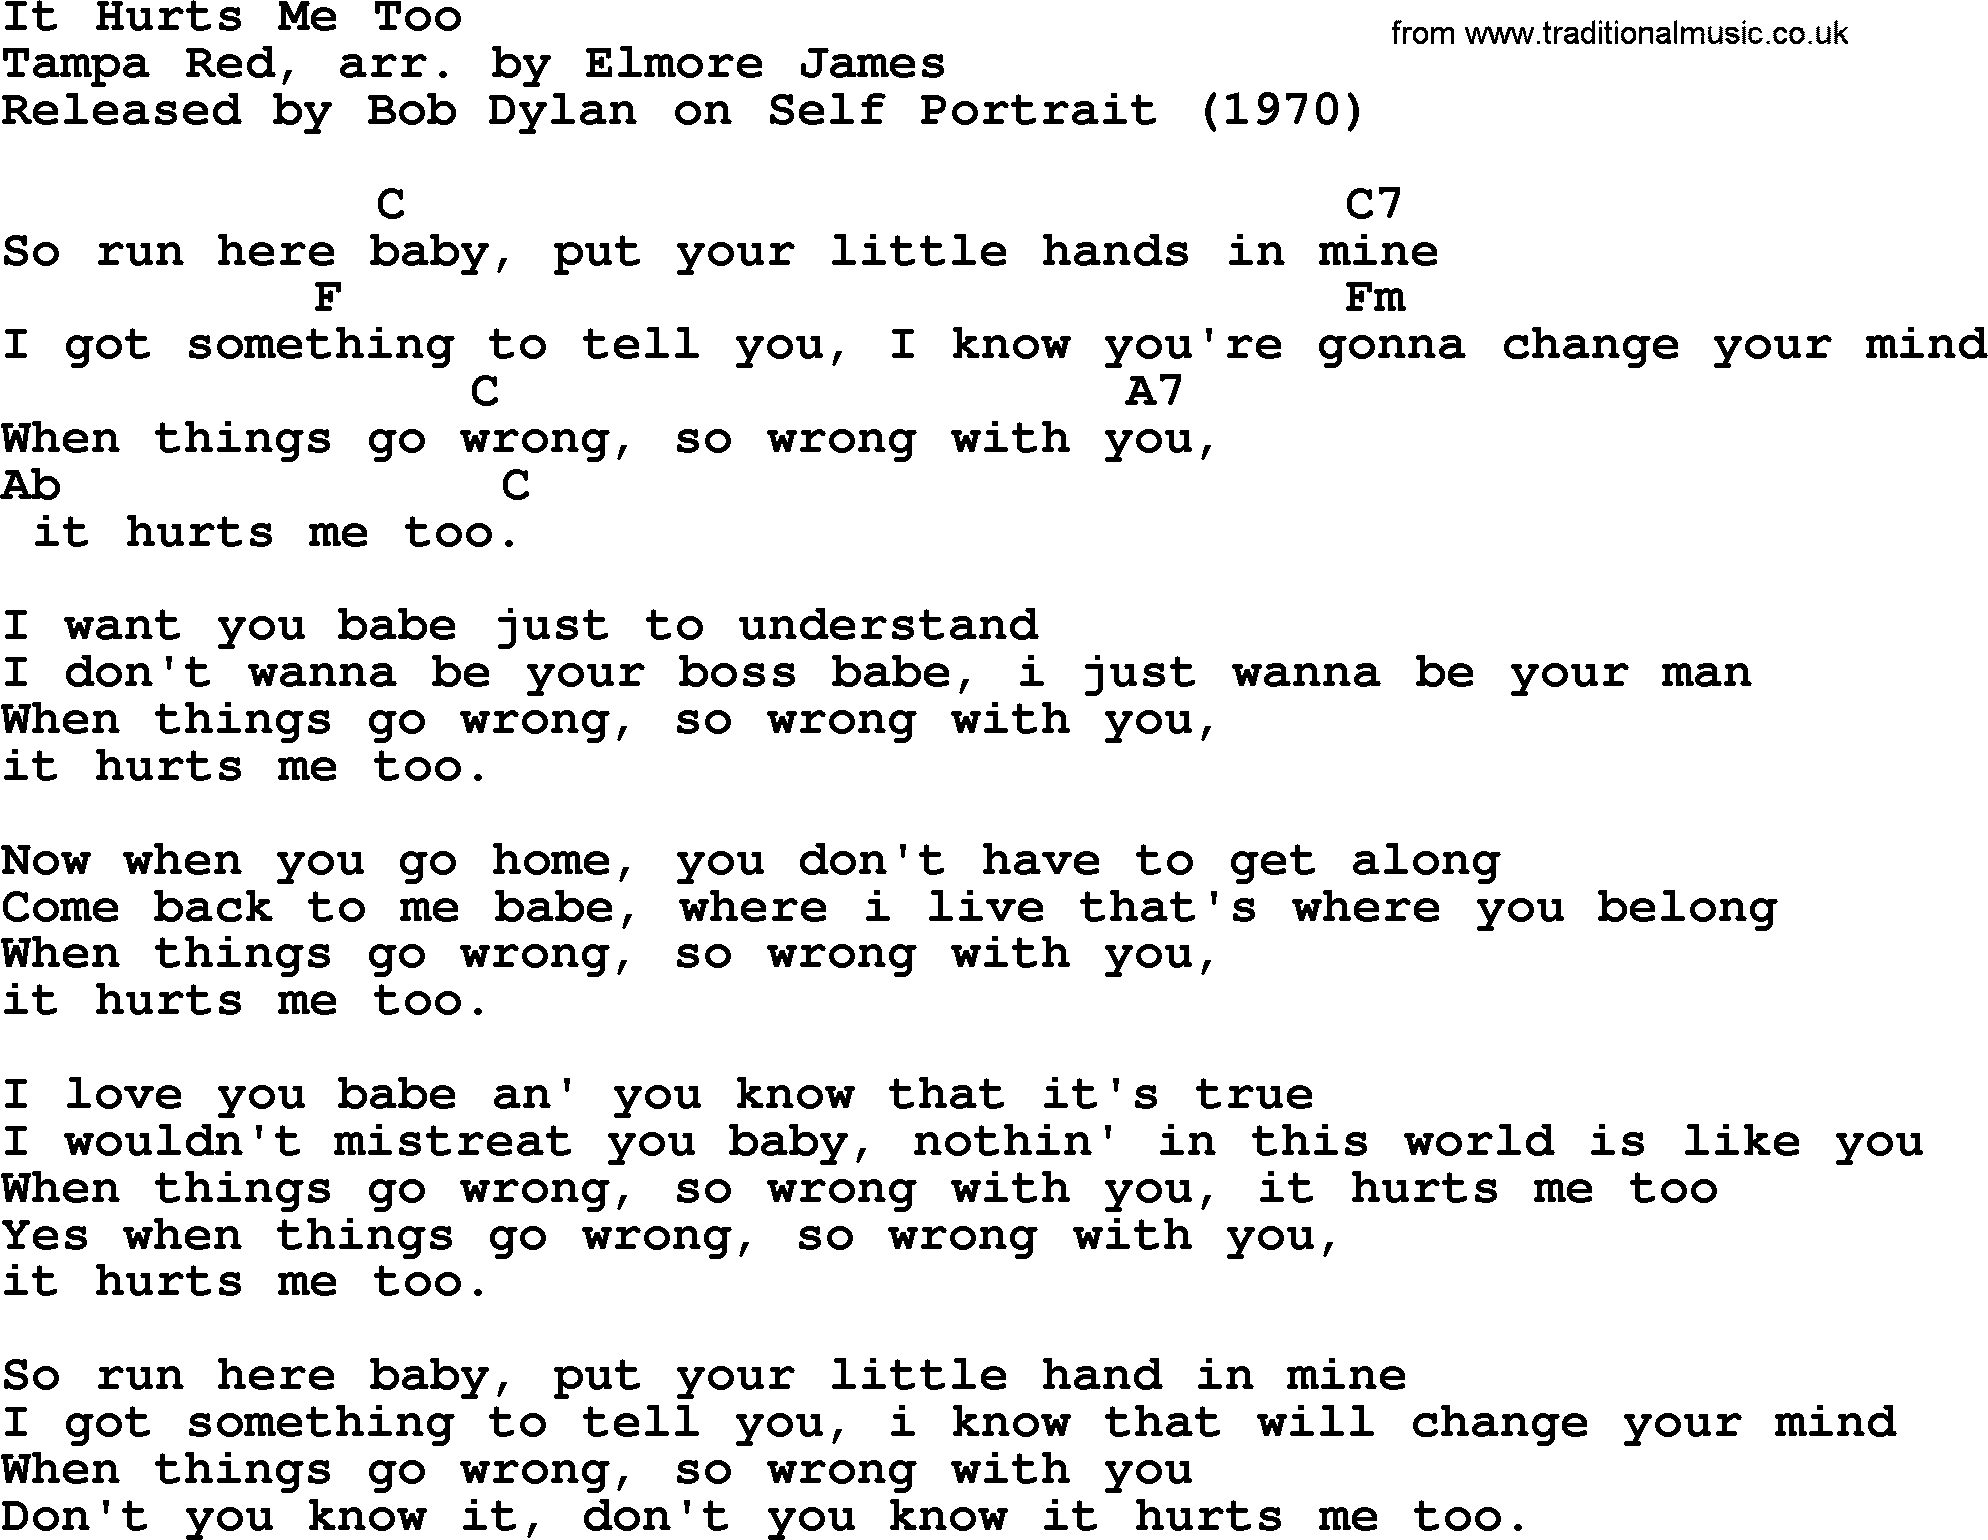 Bob Dylan song, lyrics with chords - It Hurts Me Too